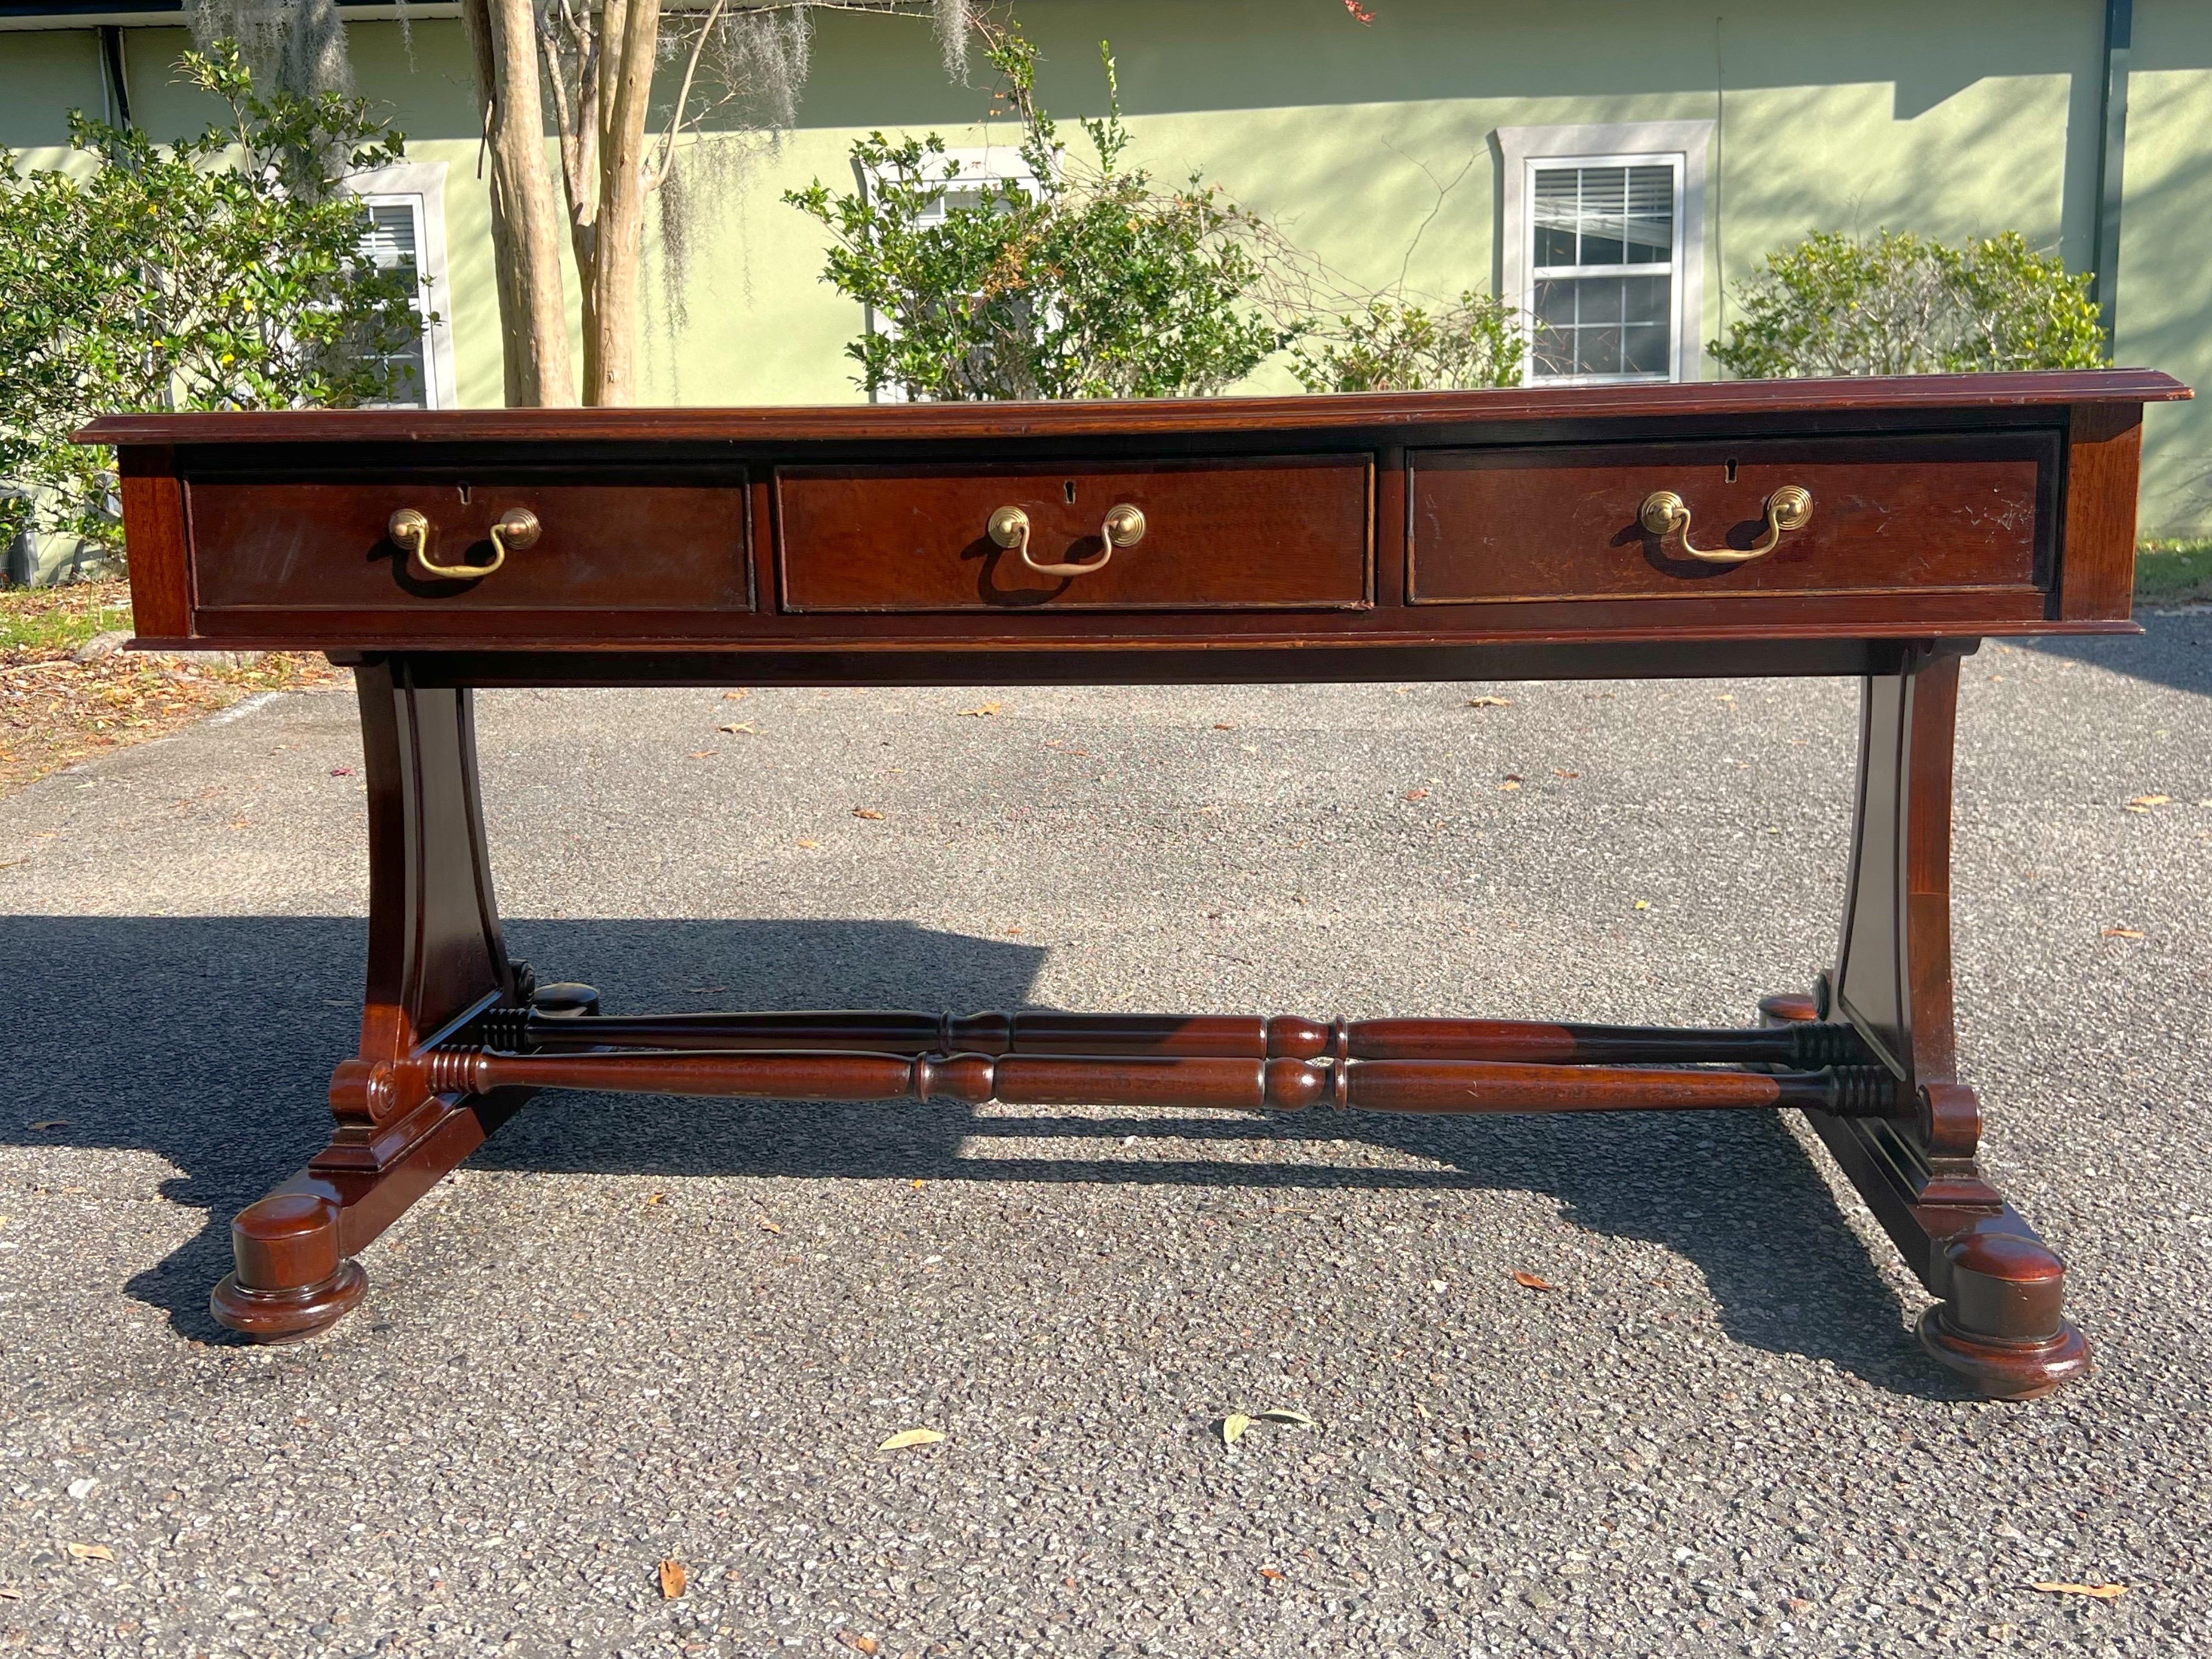 19th Century English Regency Mahogany Leather Top Writing Desk. Gold embossed floral around the leather. Satinwood trim surrounds the solid mahogany desk.  A beautiful turned double stretcher connects the legs.  3 of the drawers are deep and